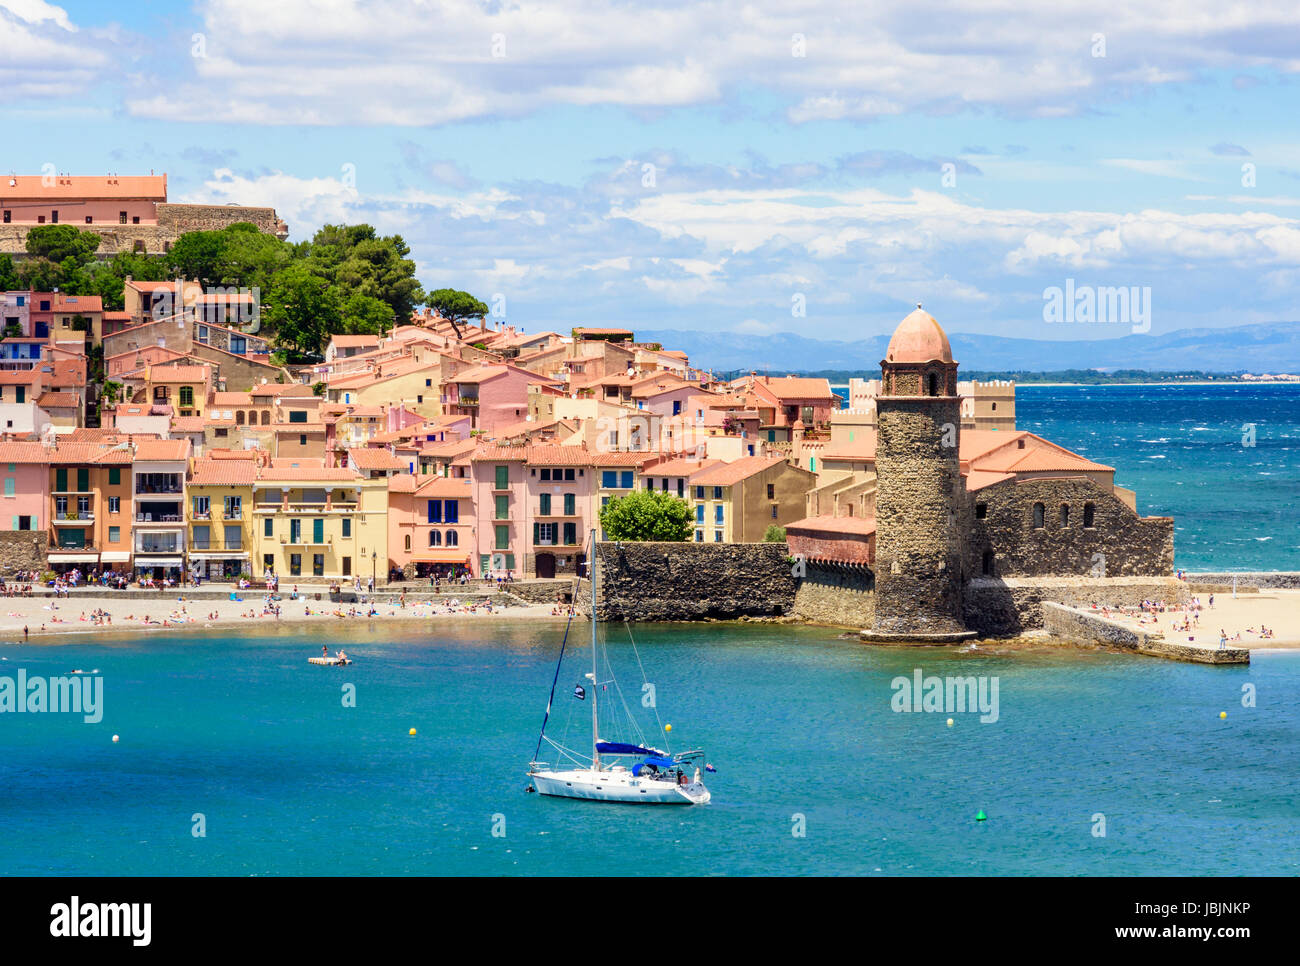 Picturesque Collioure old town and landmark bell tower of Notre Dame des Anges, Collioure, Côte Vermeille, France Stock Photo